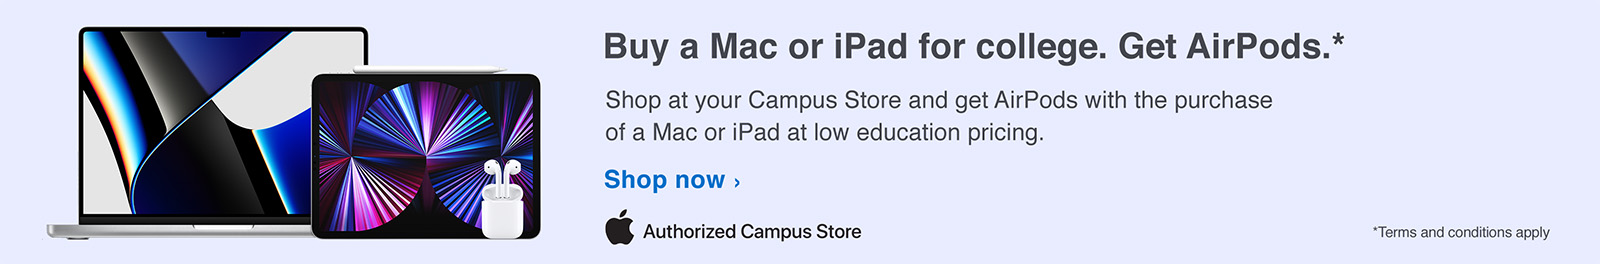 Purchase select Mac or iPad's and get free airpods valued at $129.00